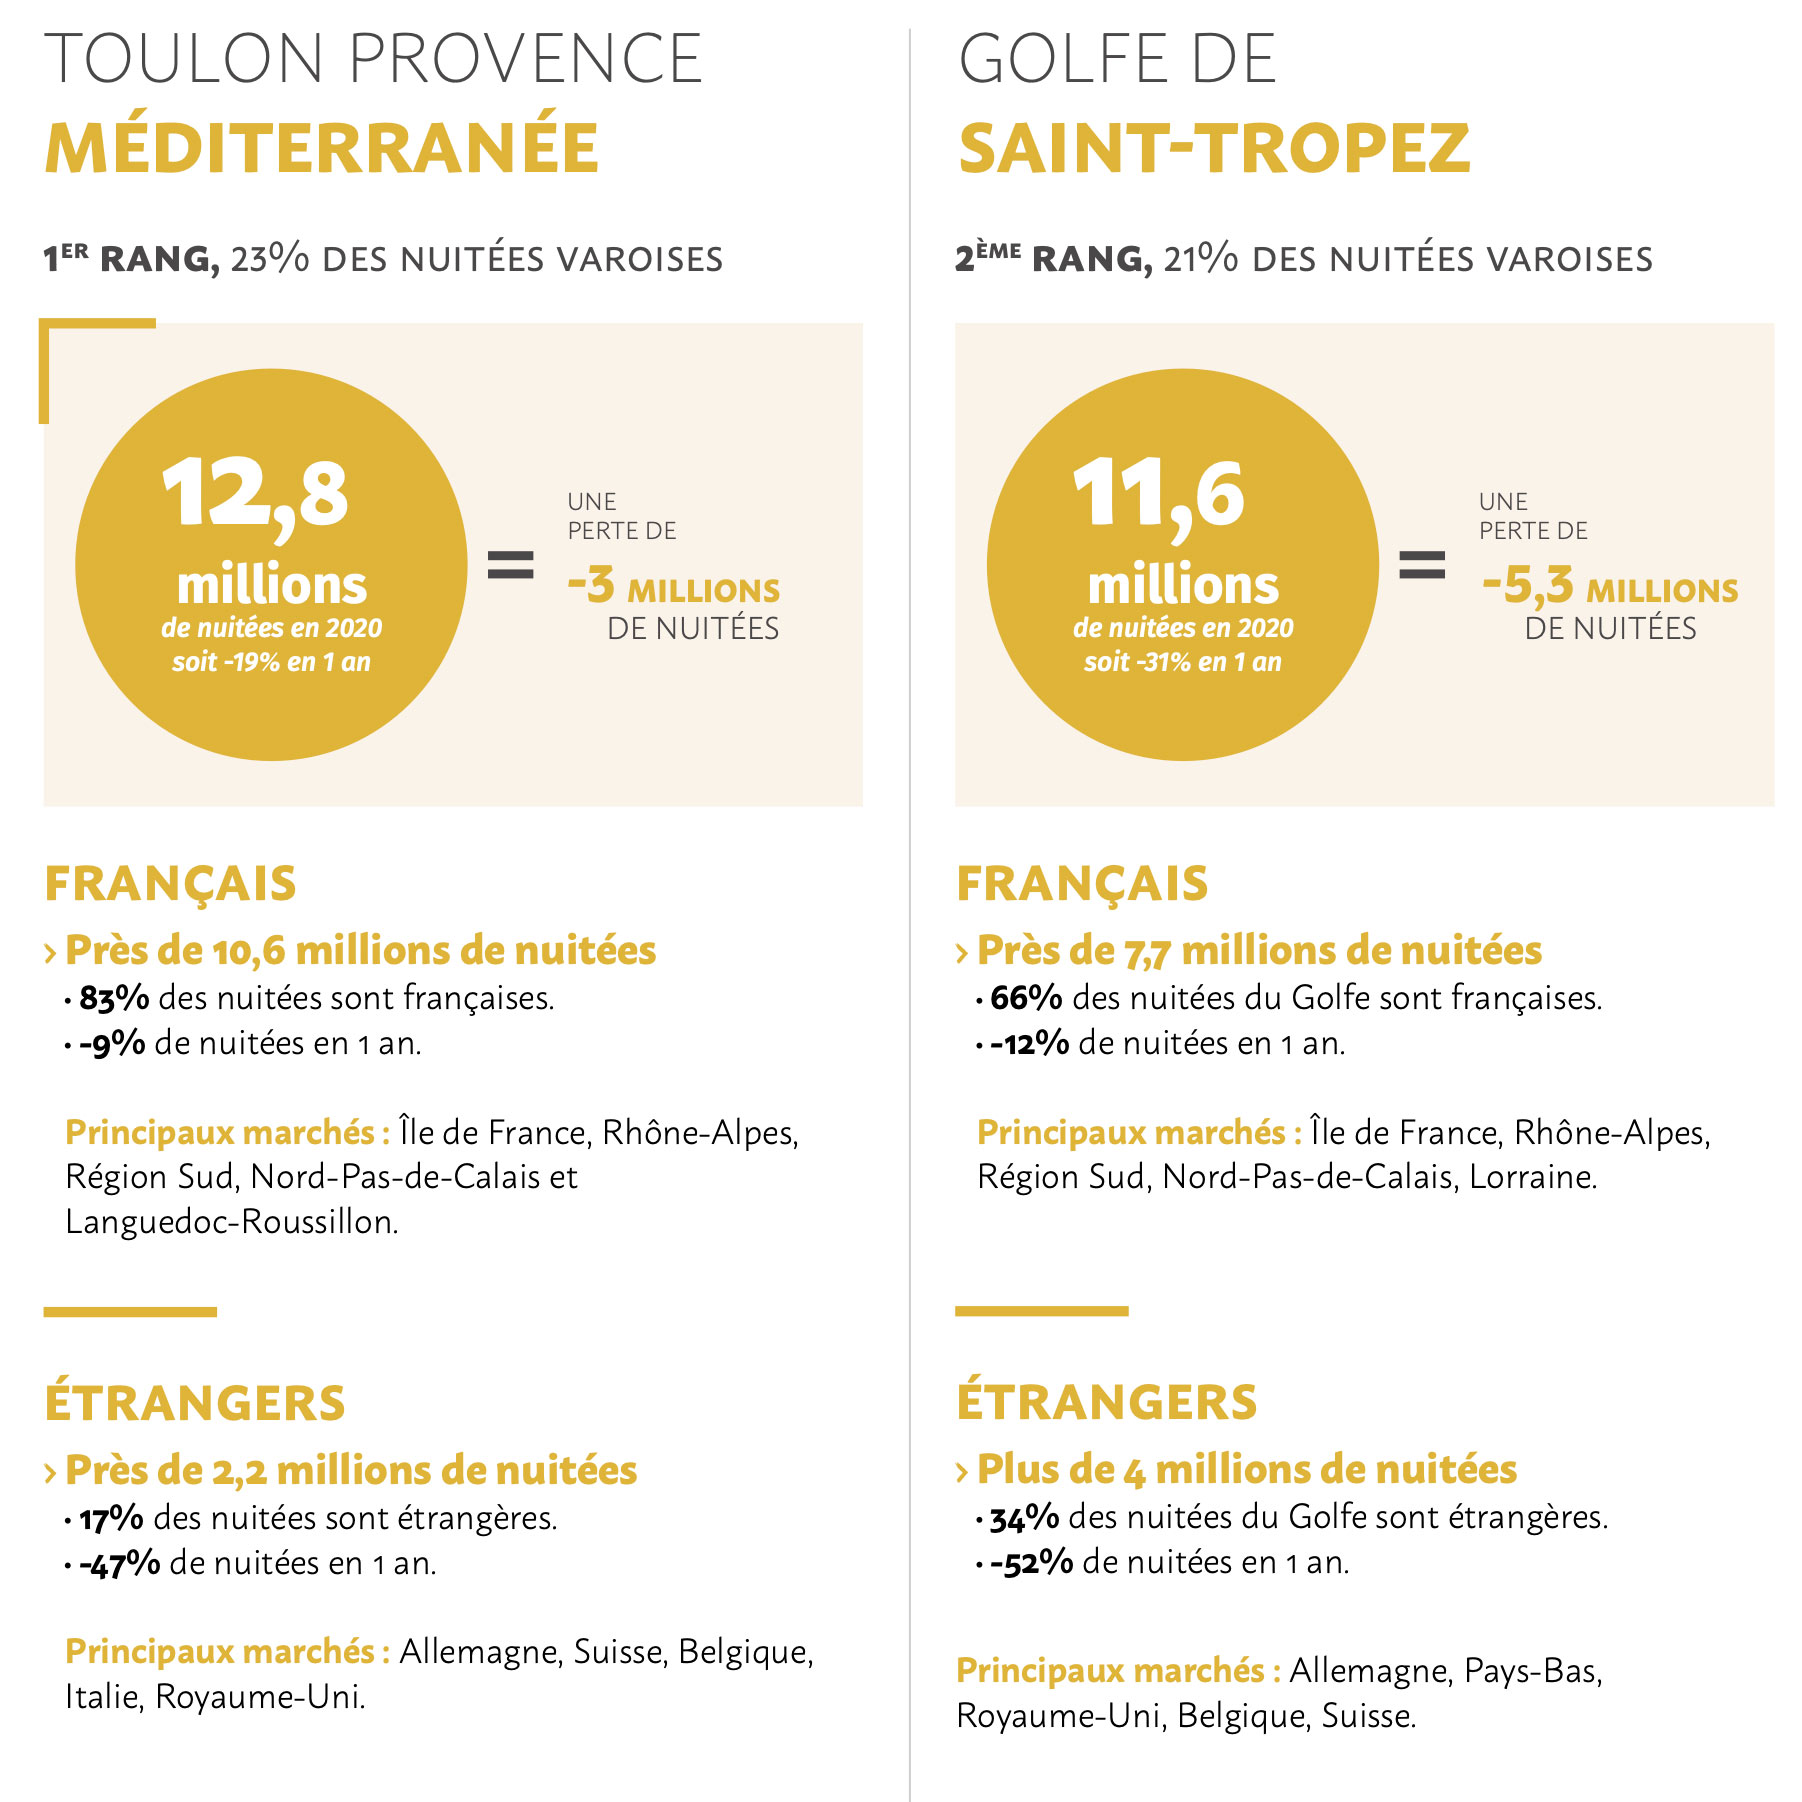 Airbnb Toulon and Saint Tropez bookings volume